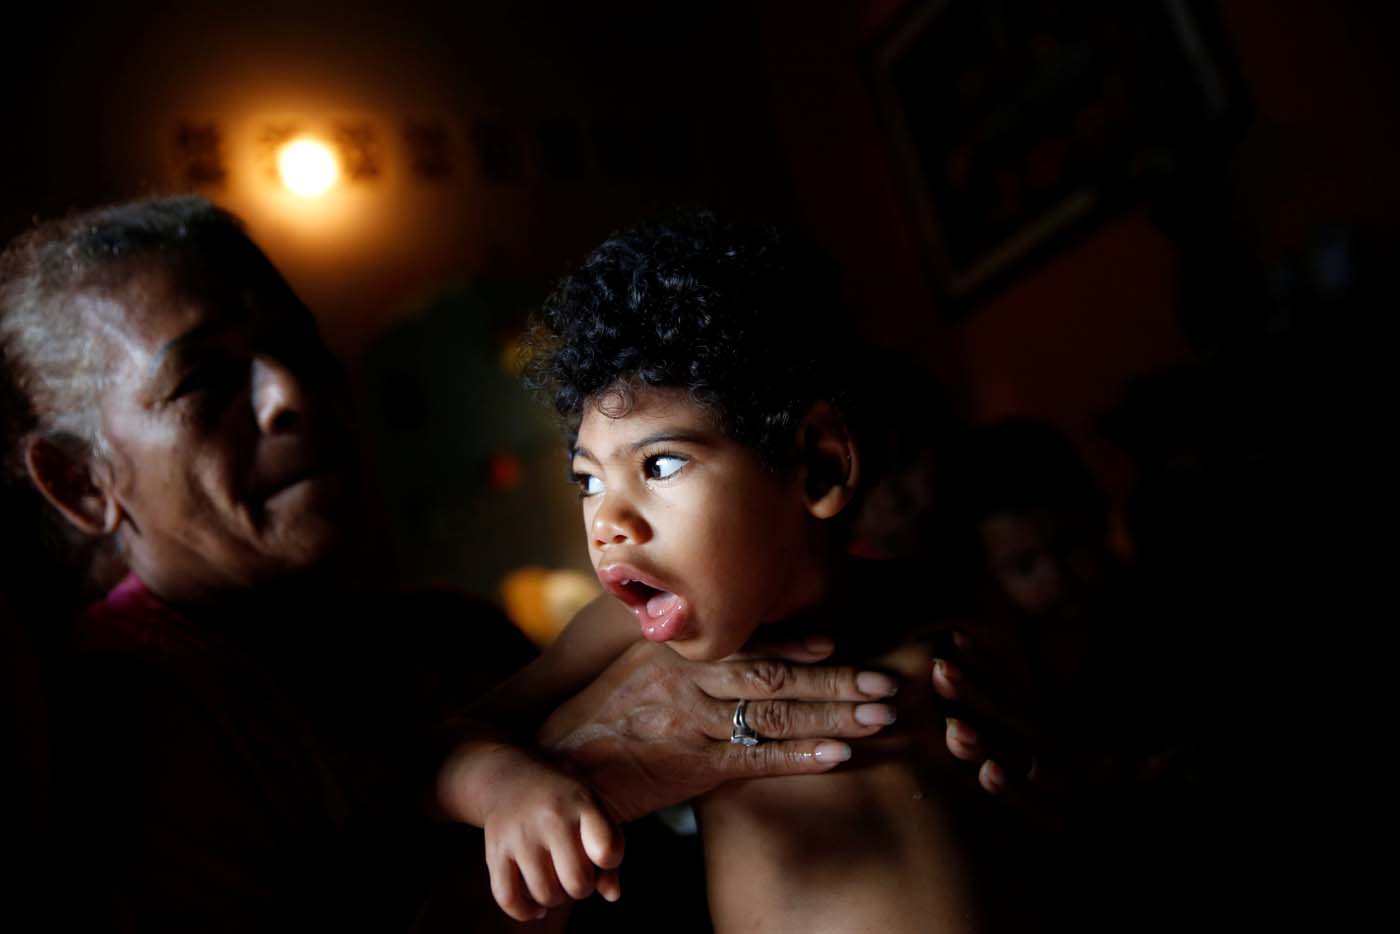 Kaleth Heredia, 2, neurological patient being treated with anticonvulsants, is carried by his grandmother Isabel Buelvas at their house in Caracas, Venezuela January 30, 2017. REUTERS/Carlos Garcia Rawlins   SEARCH "EPILEPSY CARACAS" FOR THIS STORY. SEARCH "WIDER IMAGE" FOR ALL STORIES.